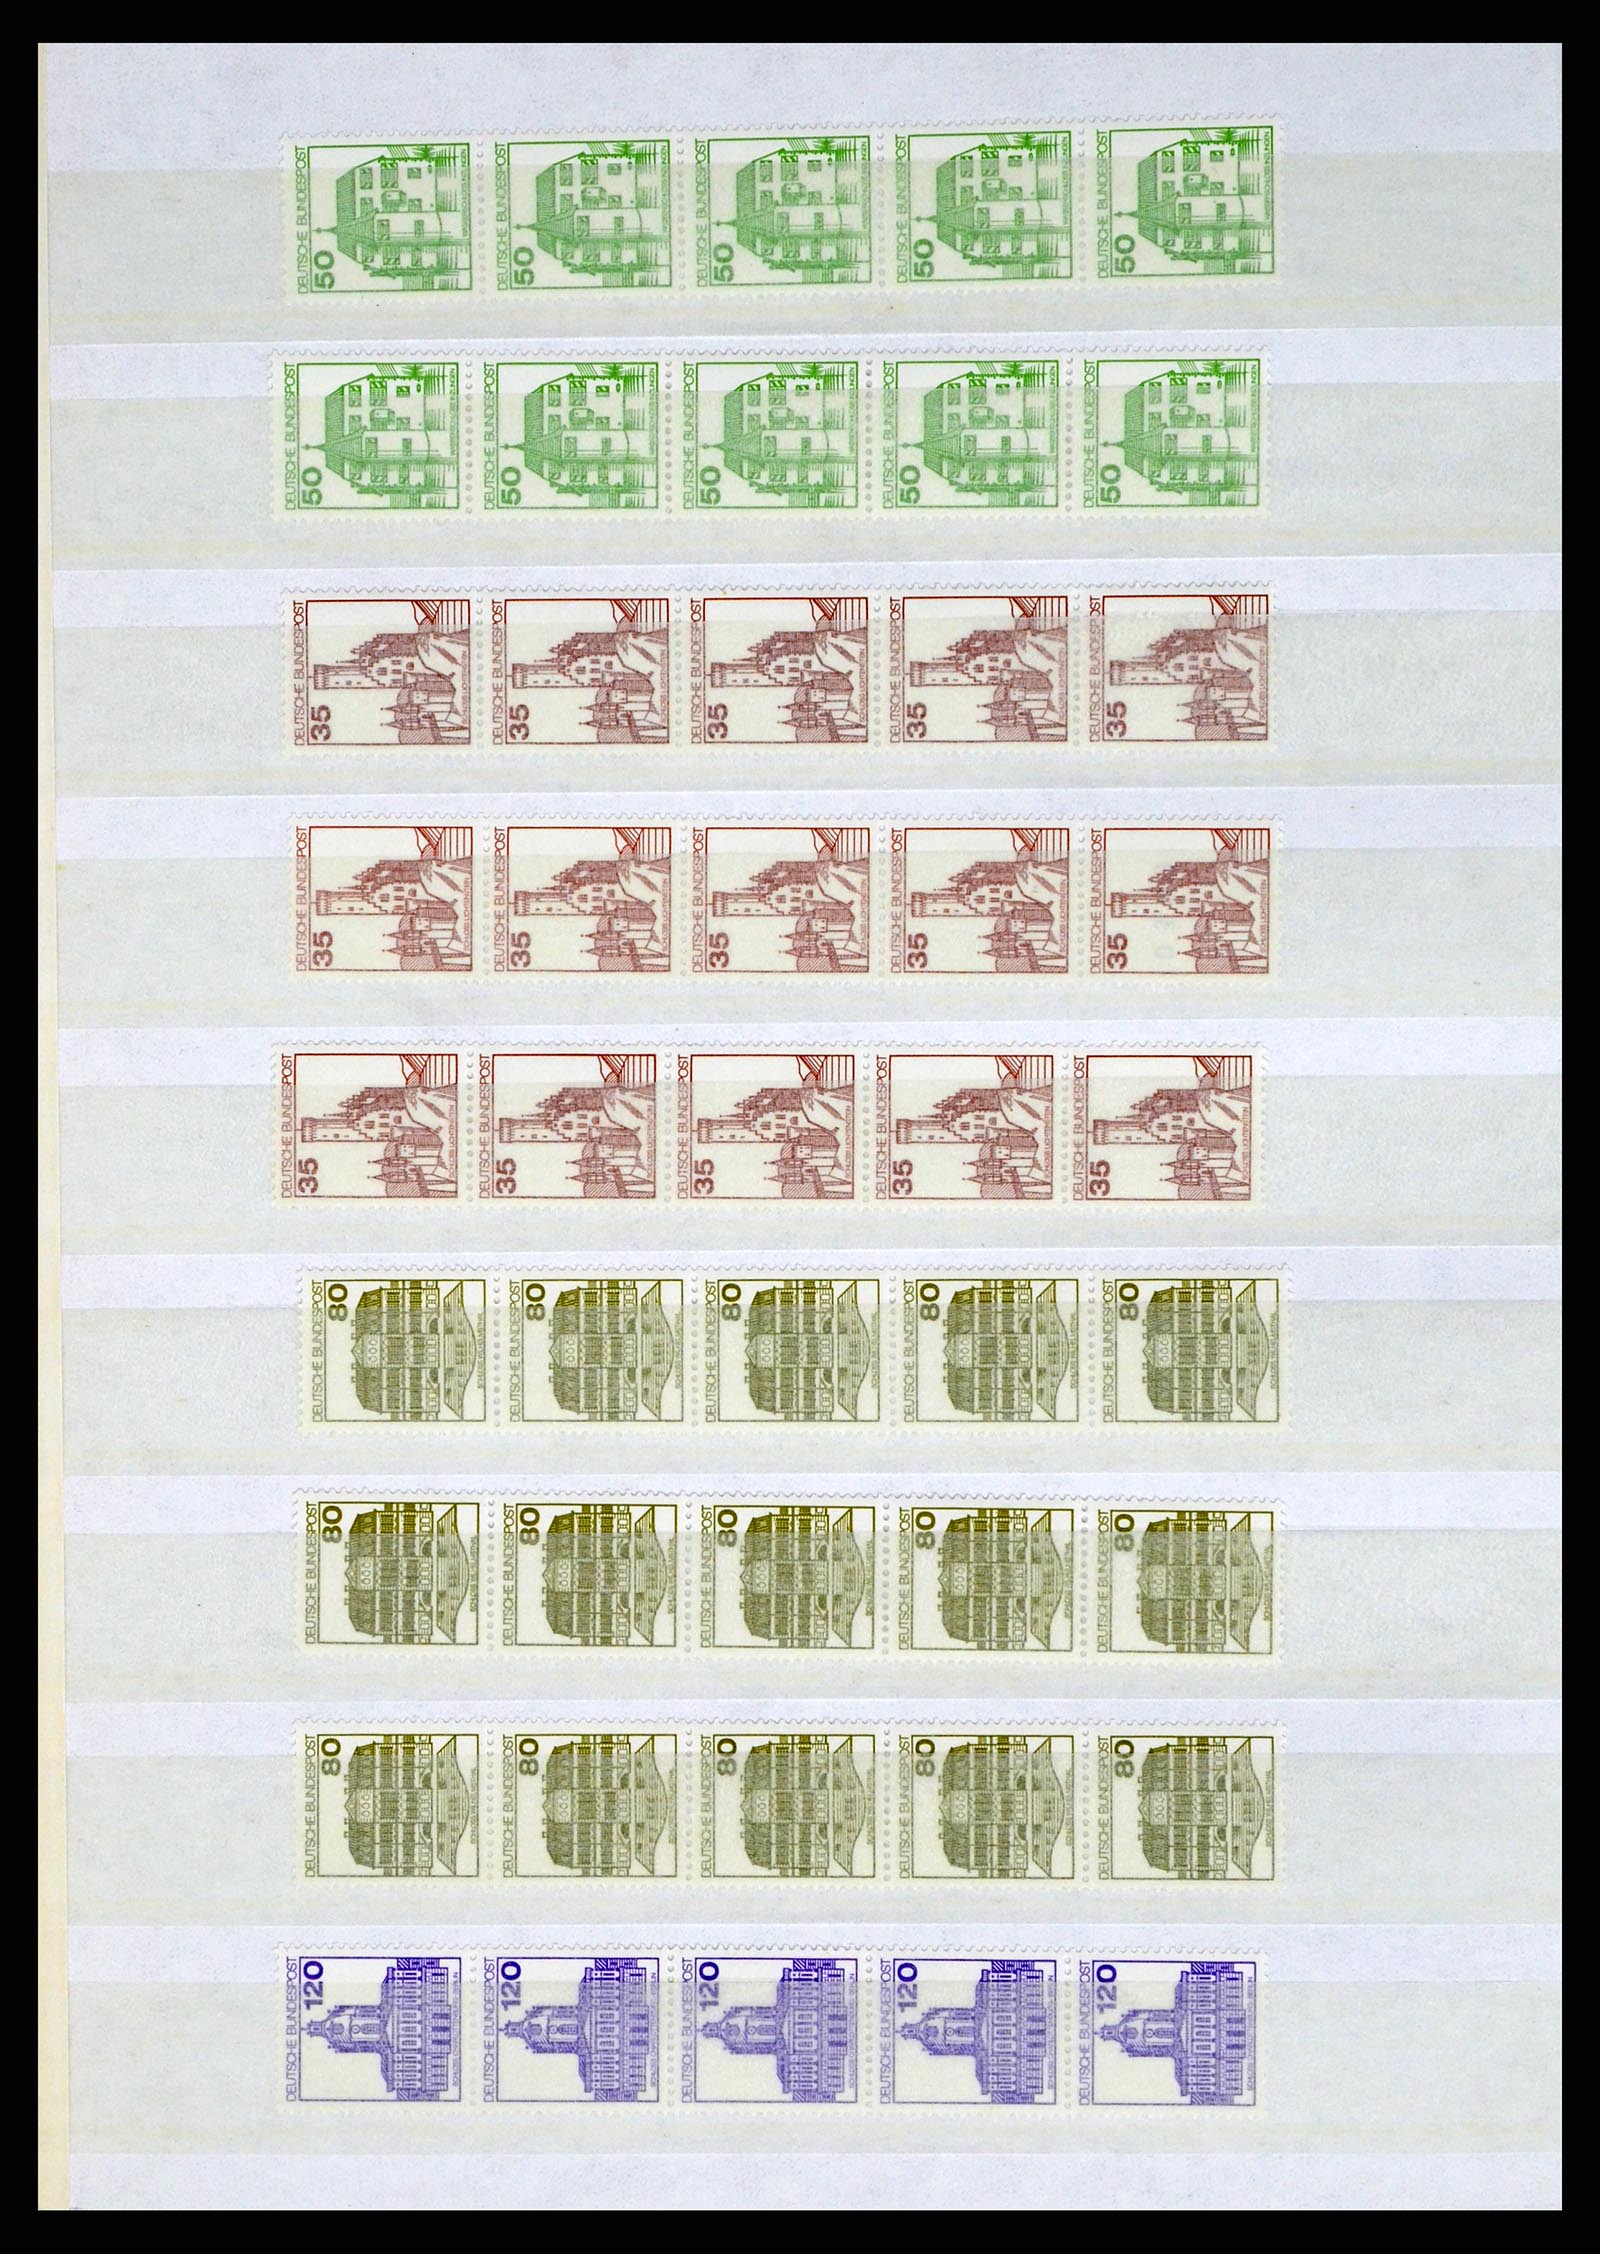 37354 068 - Stamp collection 37354 Bundespost and Berlin 1955-2000.